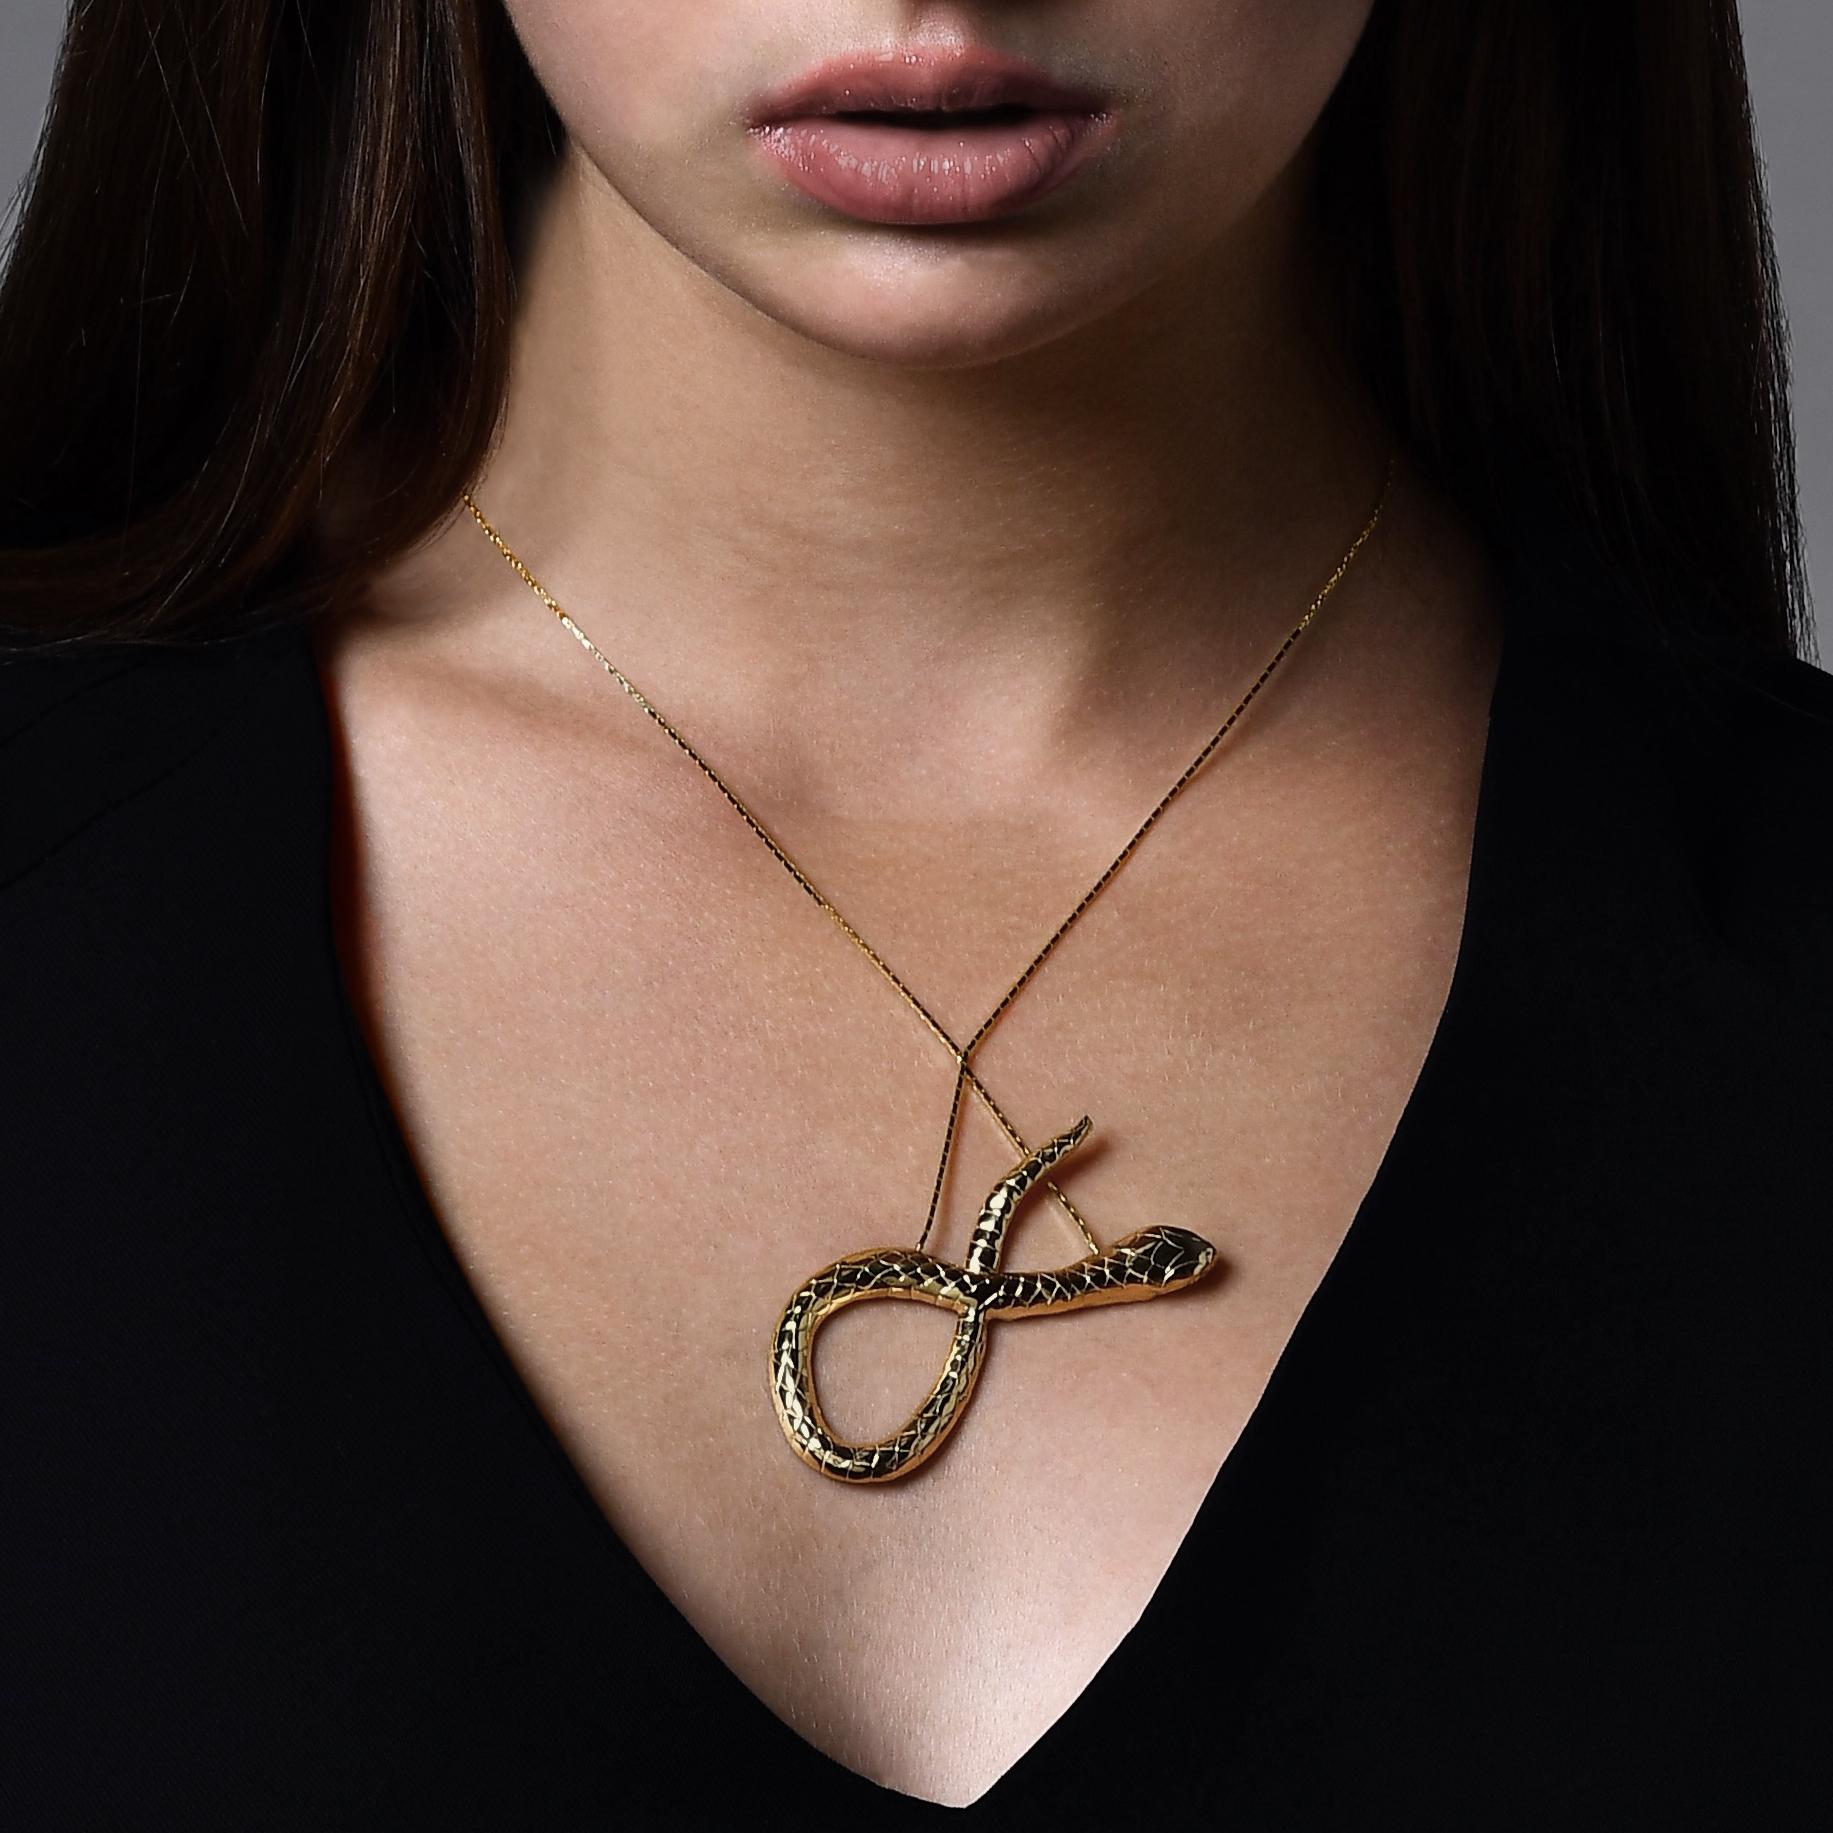 Women's Snake Necklace For Sale